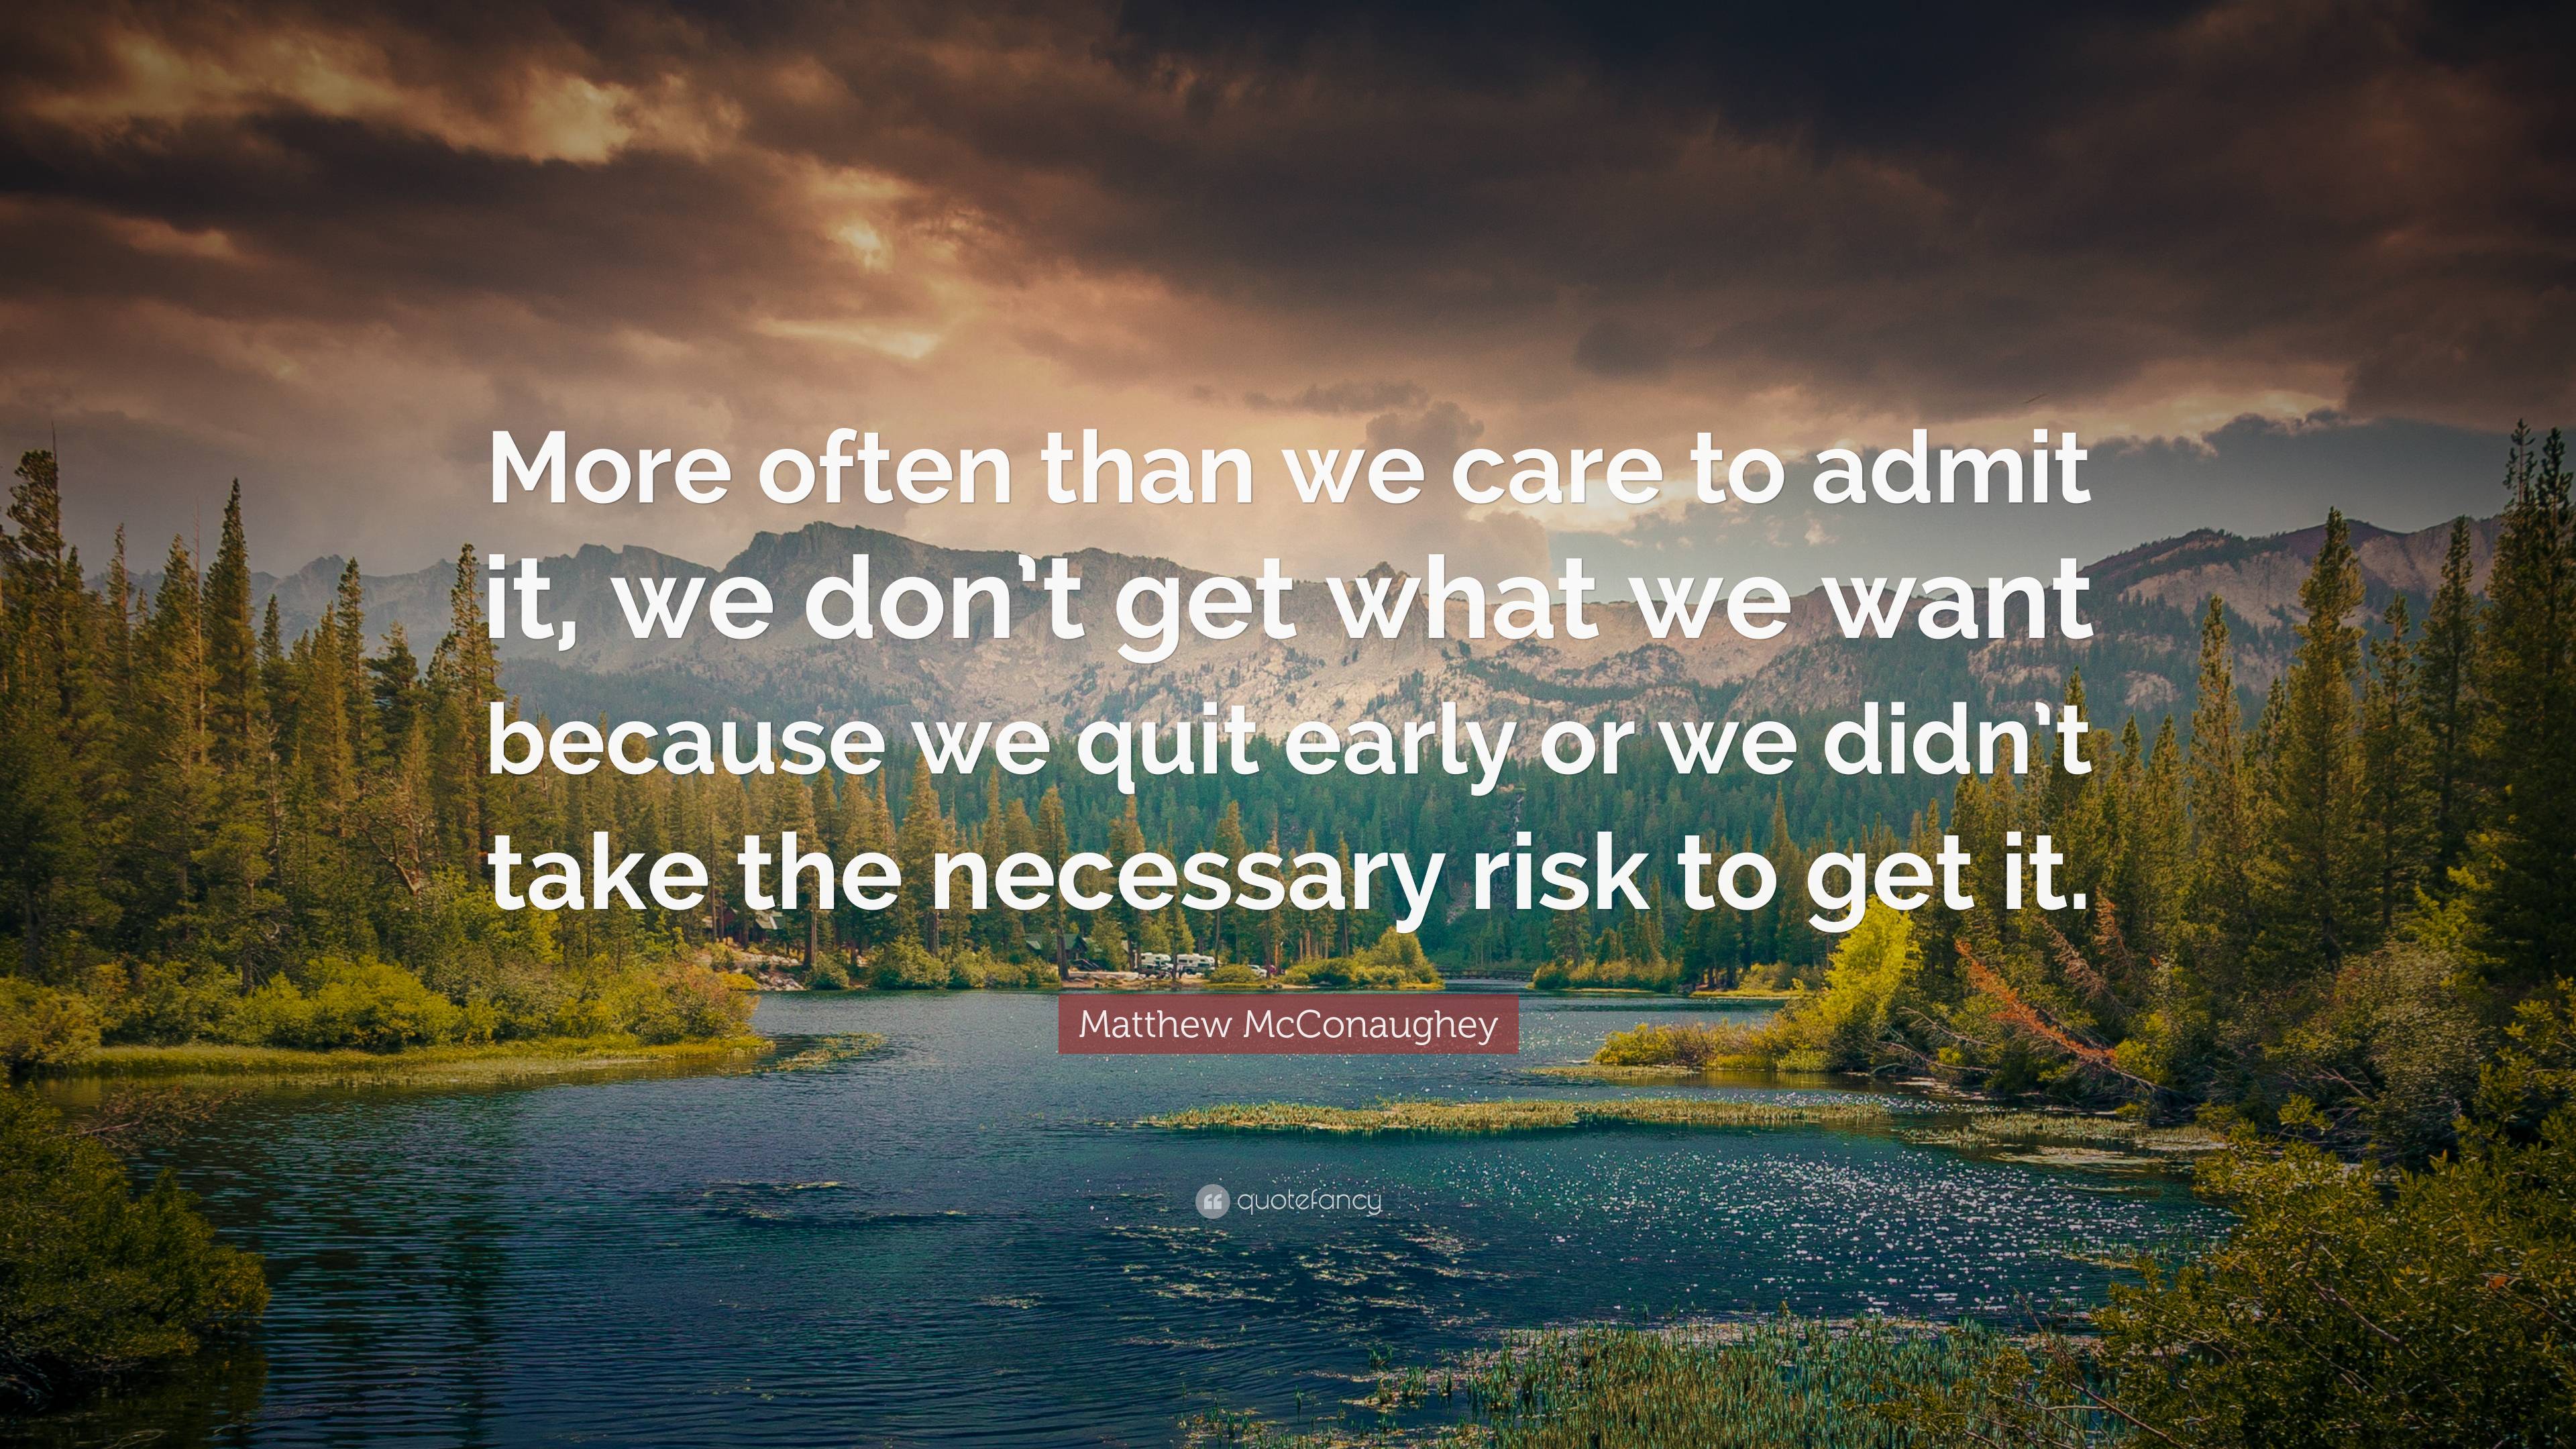 Matthew McConaughey Quote: “More often than we care to admit it, we don ...